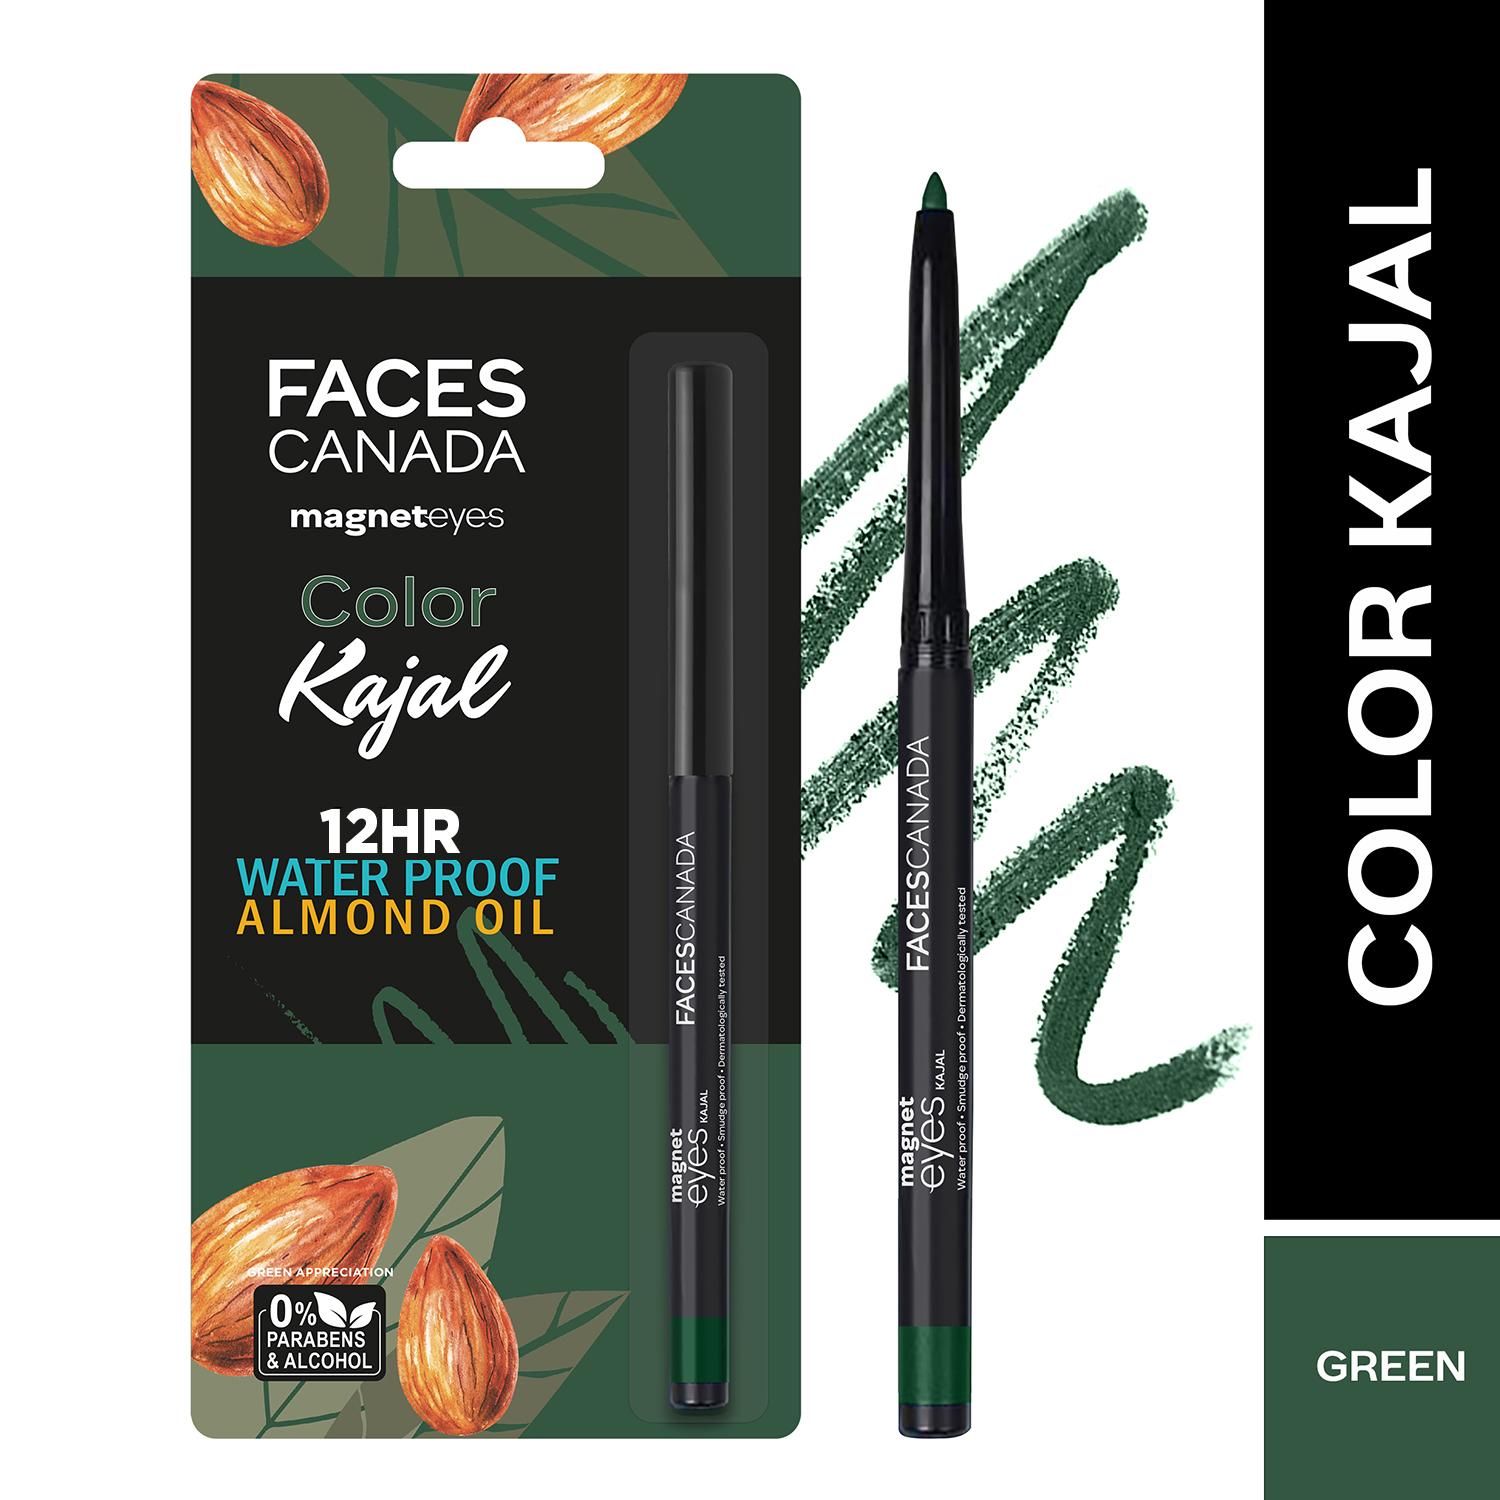 Faces Canada | Faces Canada Magneteyes Color Kajal, 12 HR Stay, Matte Finish,Water Proof -Green Appreciation 02 (0.30 g)